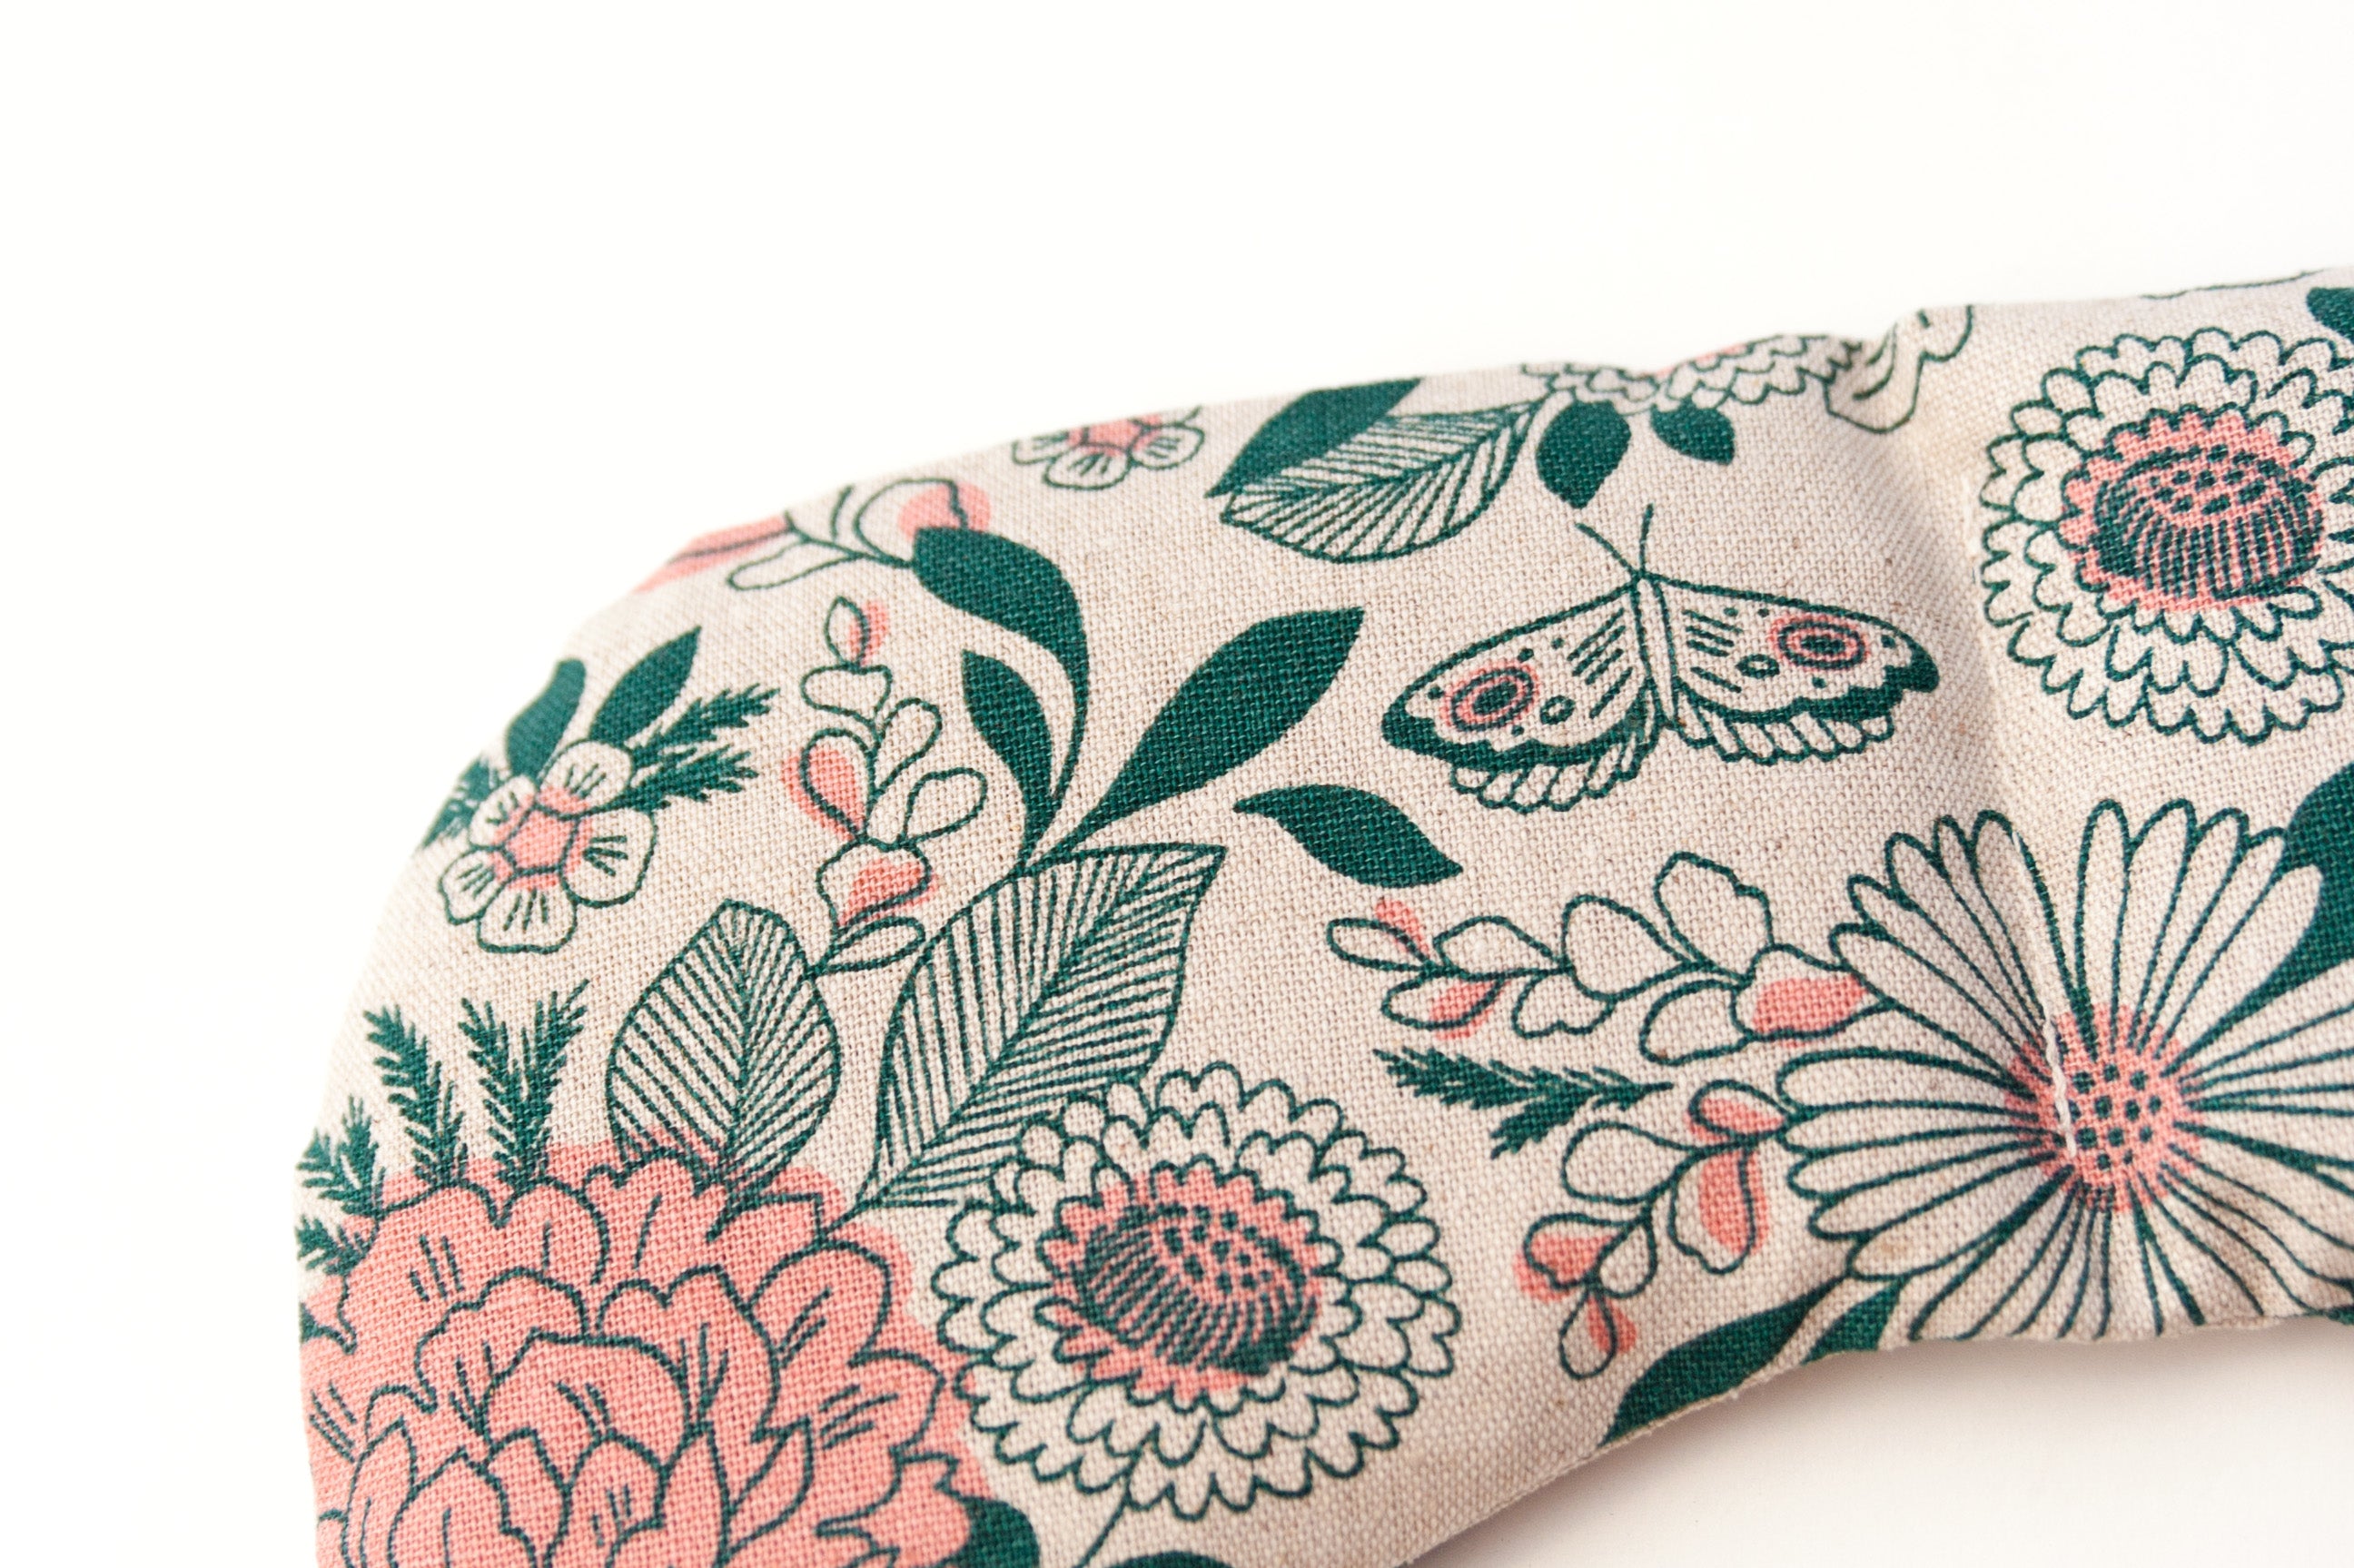 Migraine Mask by Slow North. Strap free cotton weighted eye pillow to be used hot or cold to sooth headaches and tired eyes. Tan and pink and green floral pattern. Zoom in on detail. White background.